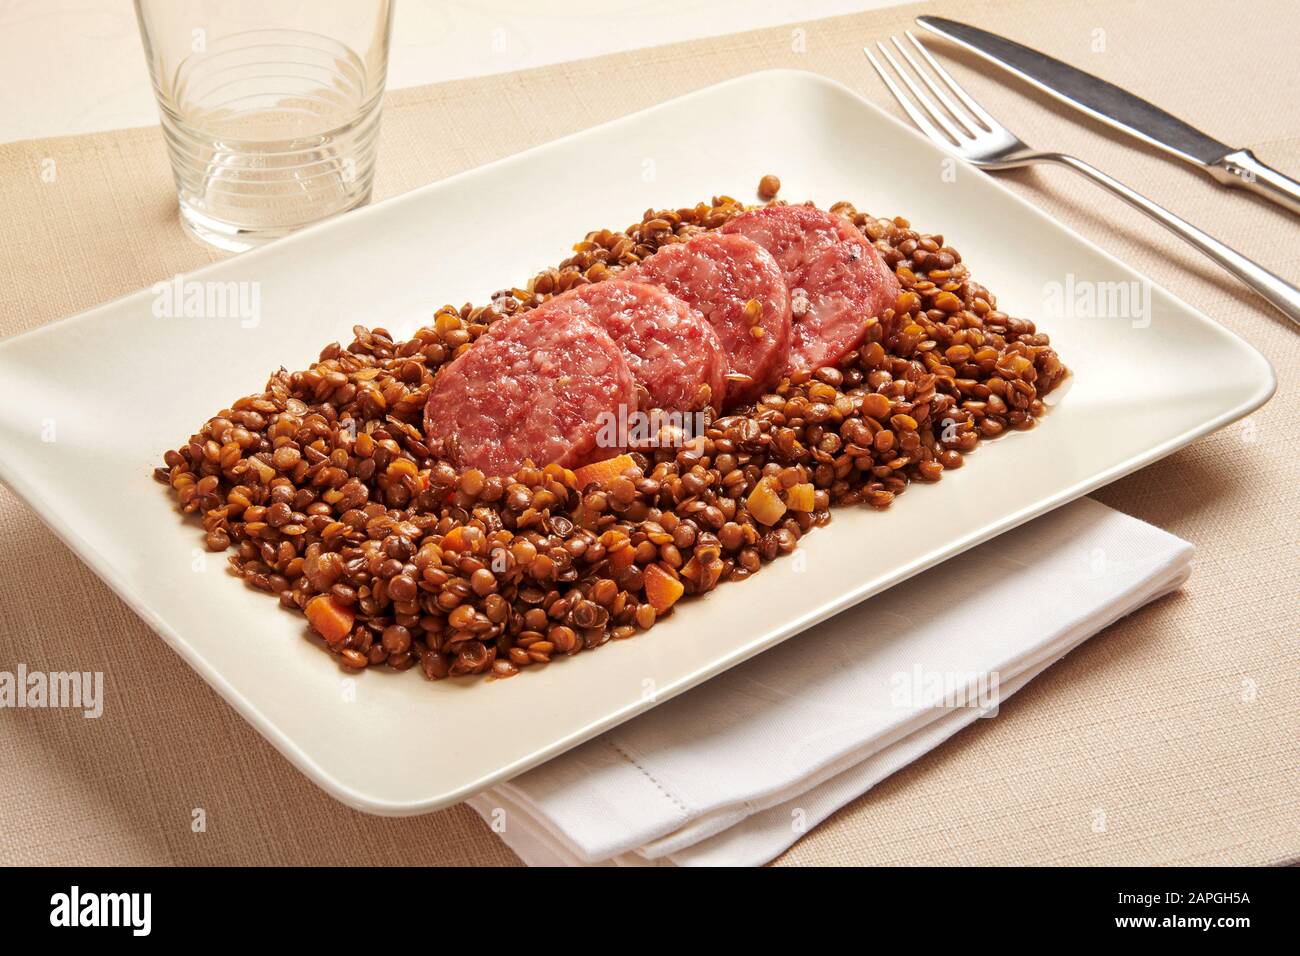 Cotechino and lentils, a traditional northern Italian dish of spicy pork sausage and brown lentils served on New Years Eve, on a rectangular platter Stock Photo